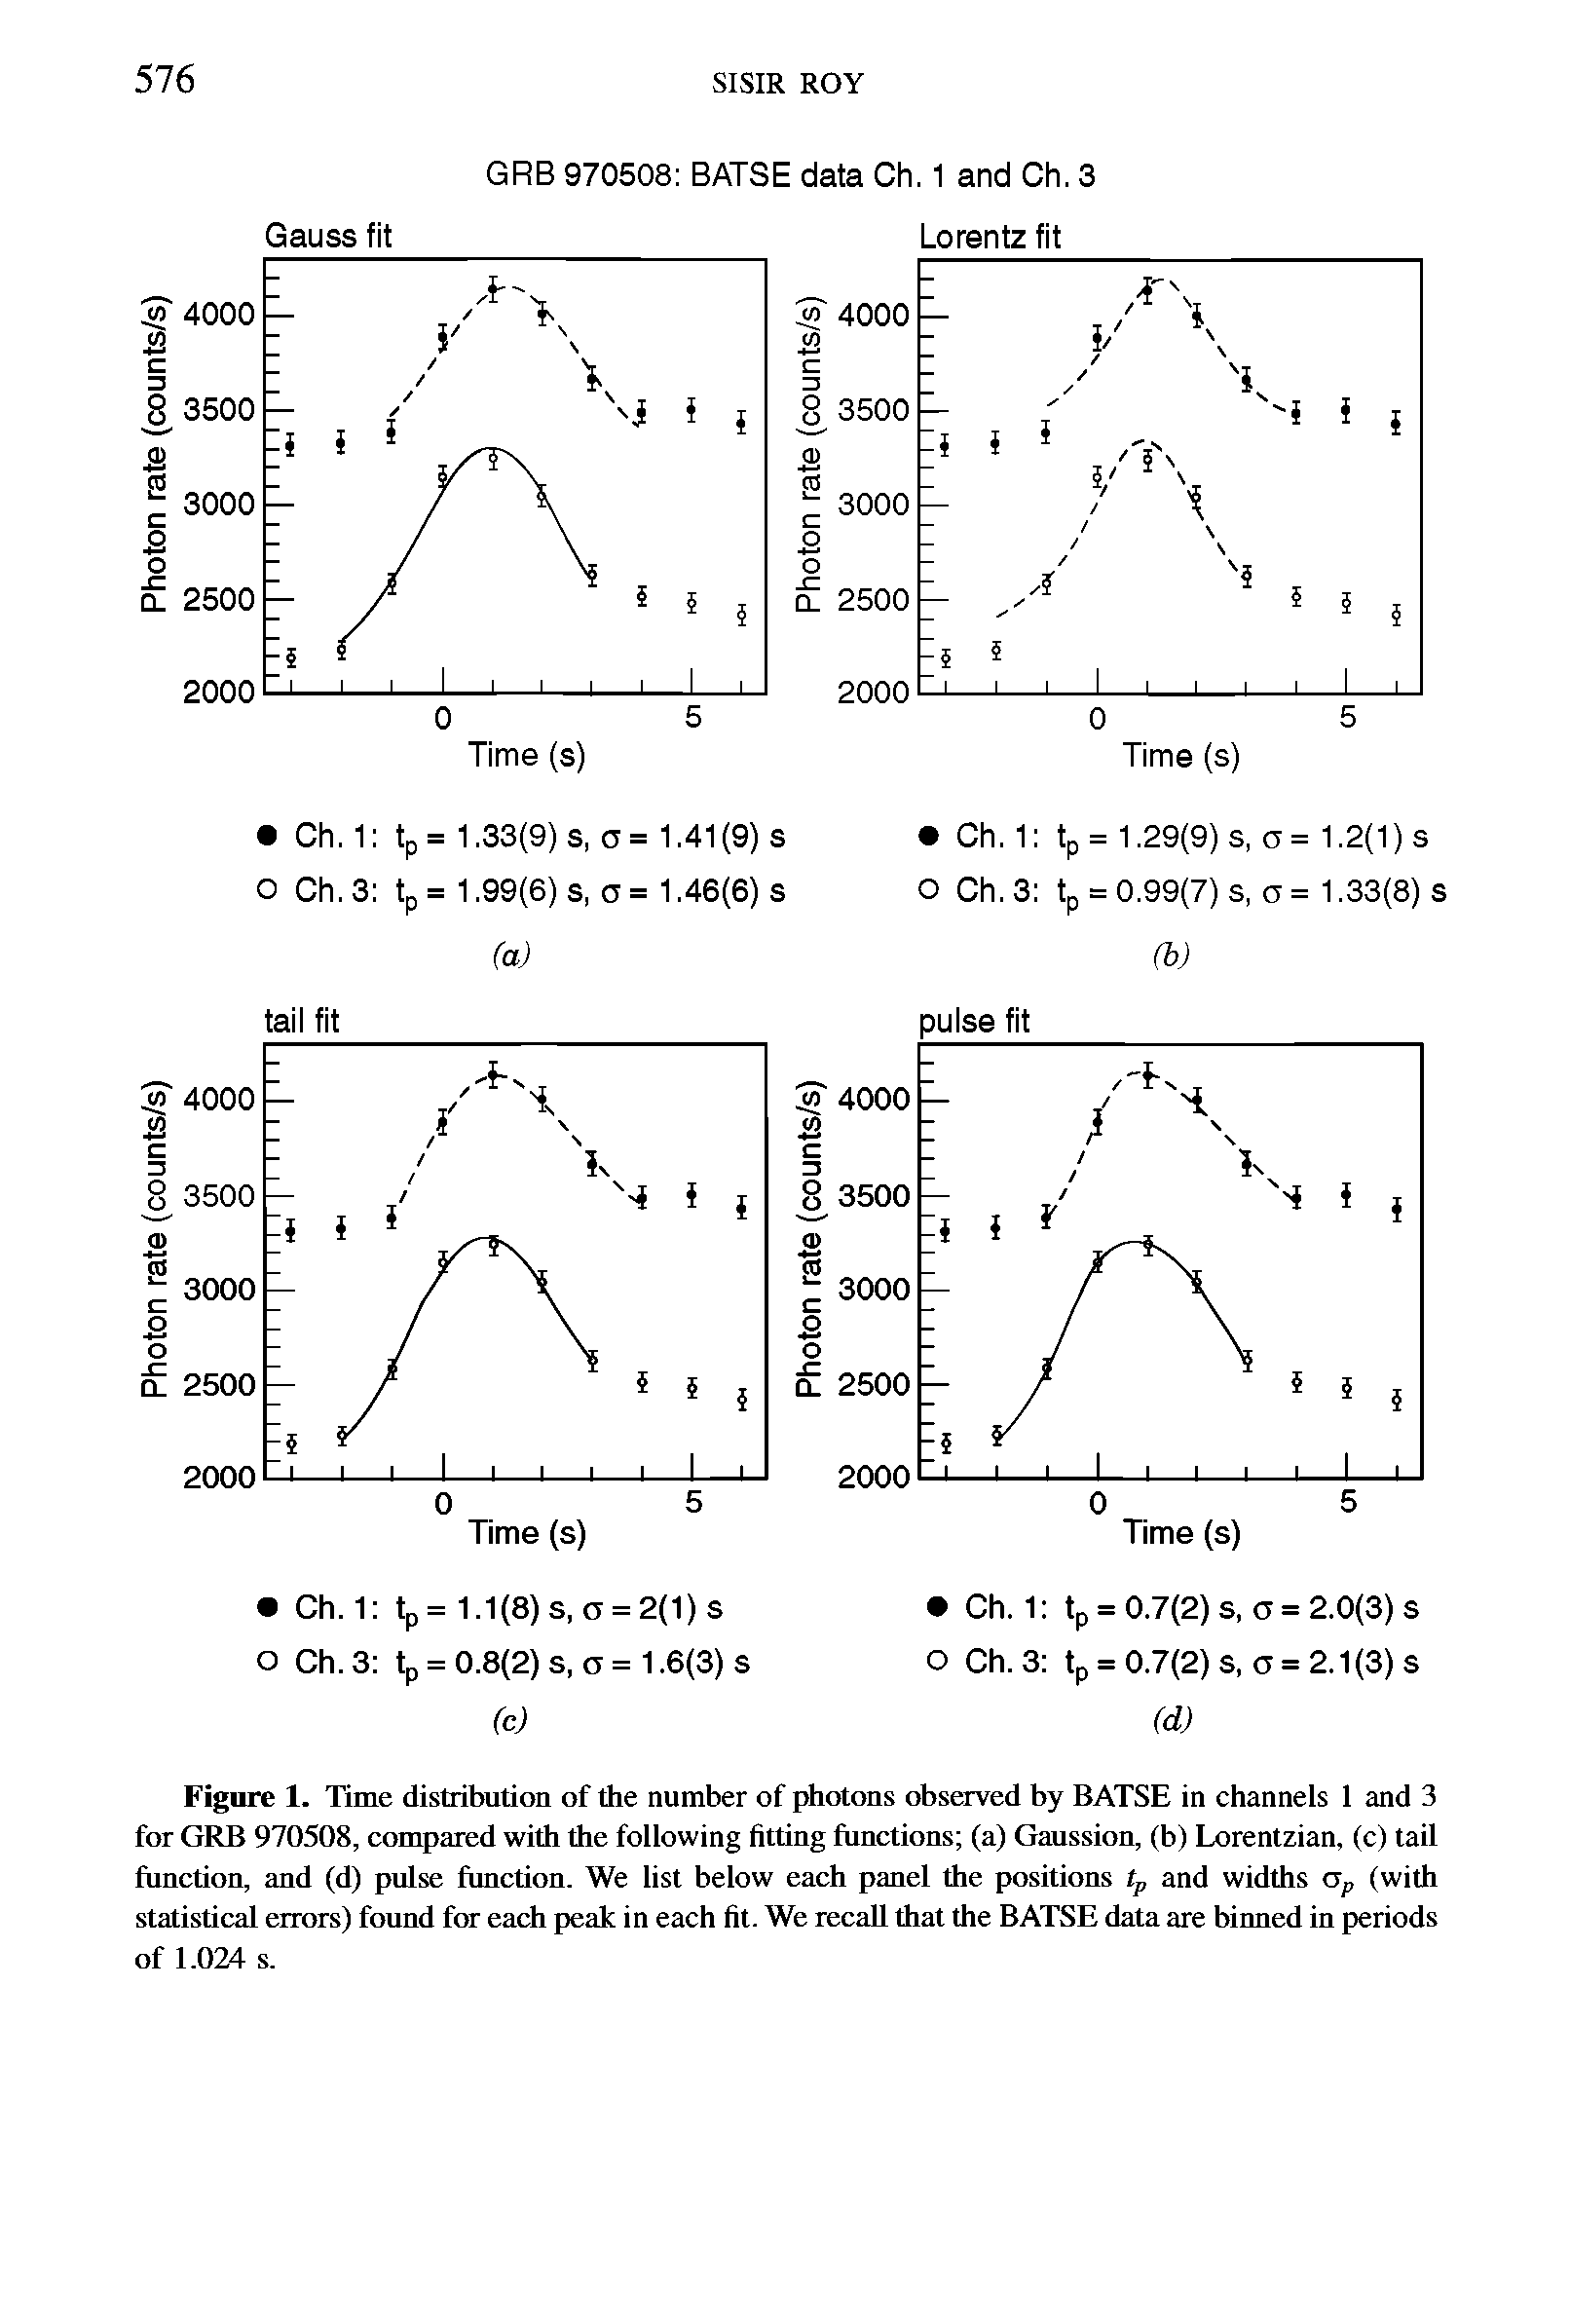 Figure 1. Time distribution of the number of photons observed by BATSE in channels 1 and 3 for GRB 970508, compared with the following fitting functions (a) Gaussion, (b) Lorentzian, (c) tail function, and (d) pulse function. We list below each panel the positions tp and widths ap (with statistical errors) found for each peak in each fit. We recall that the BATSE data are binned in periods of 1.024 s.